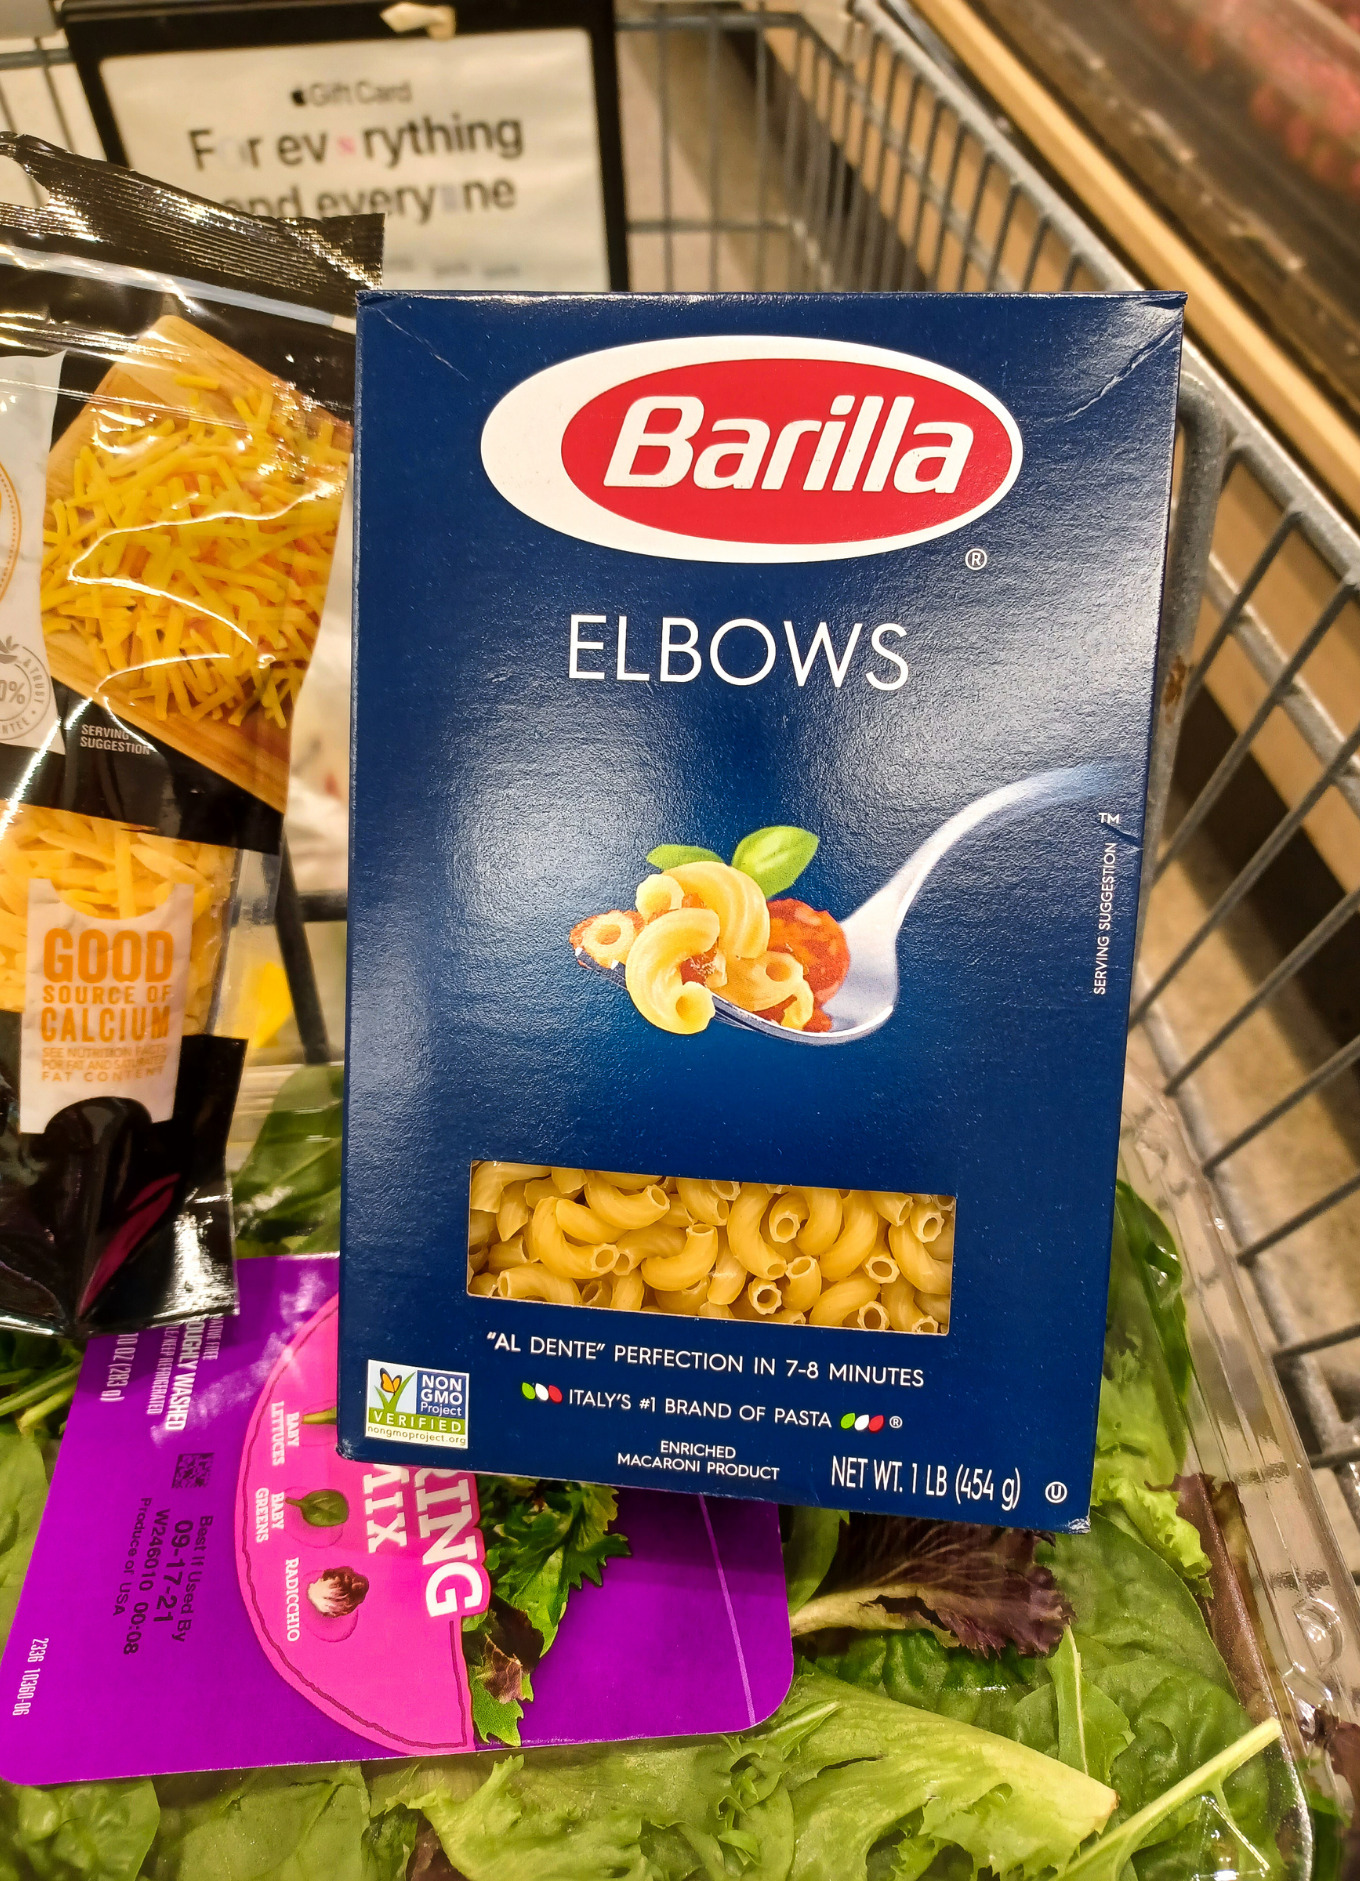 A box of Barilla elbow macaroni in a grocery cart